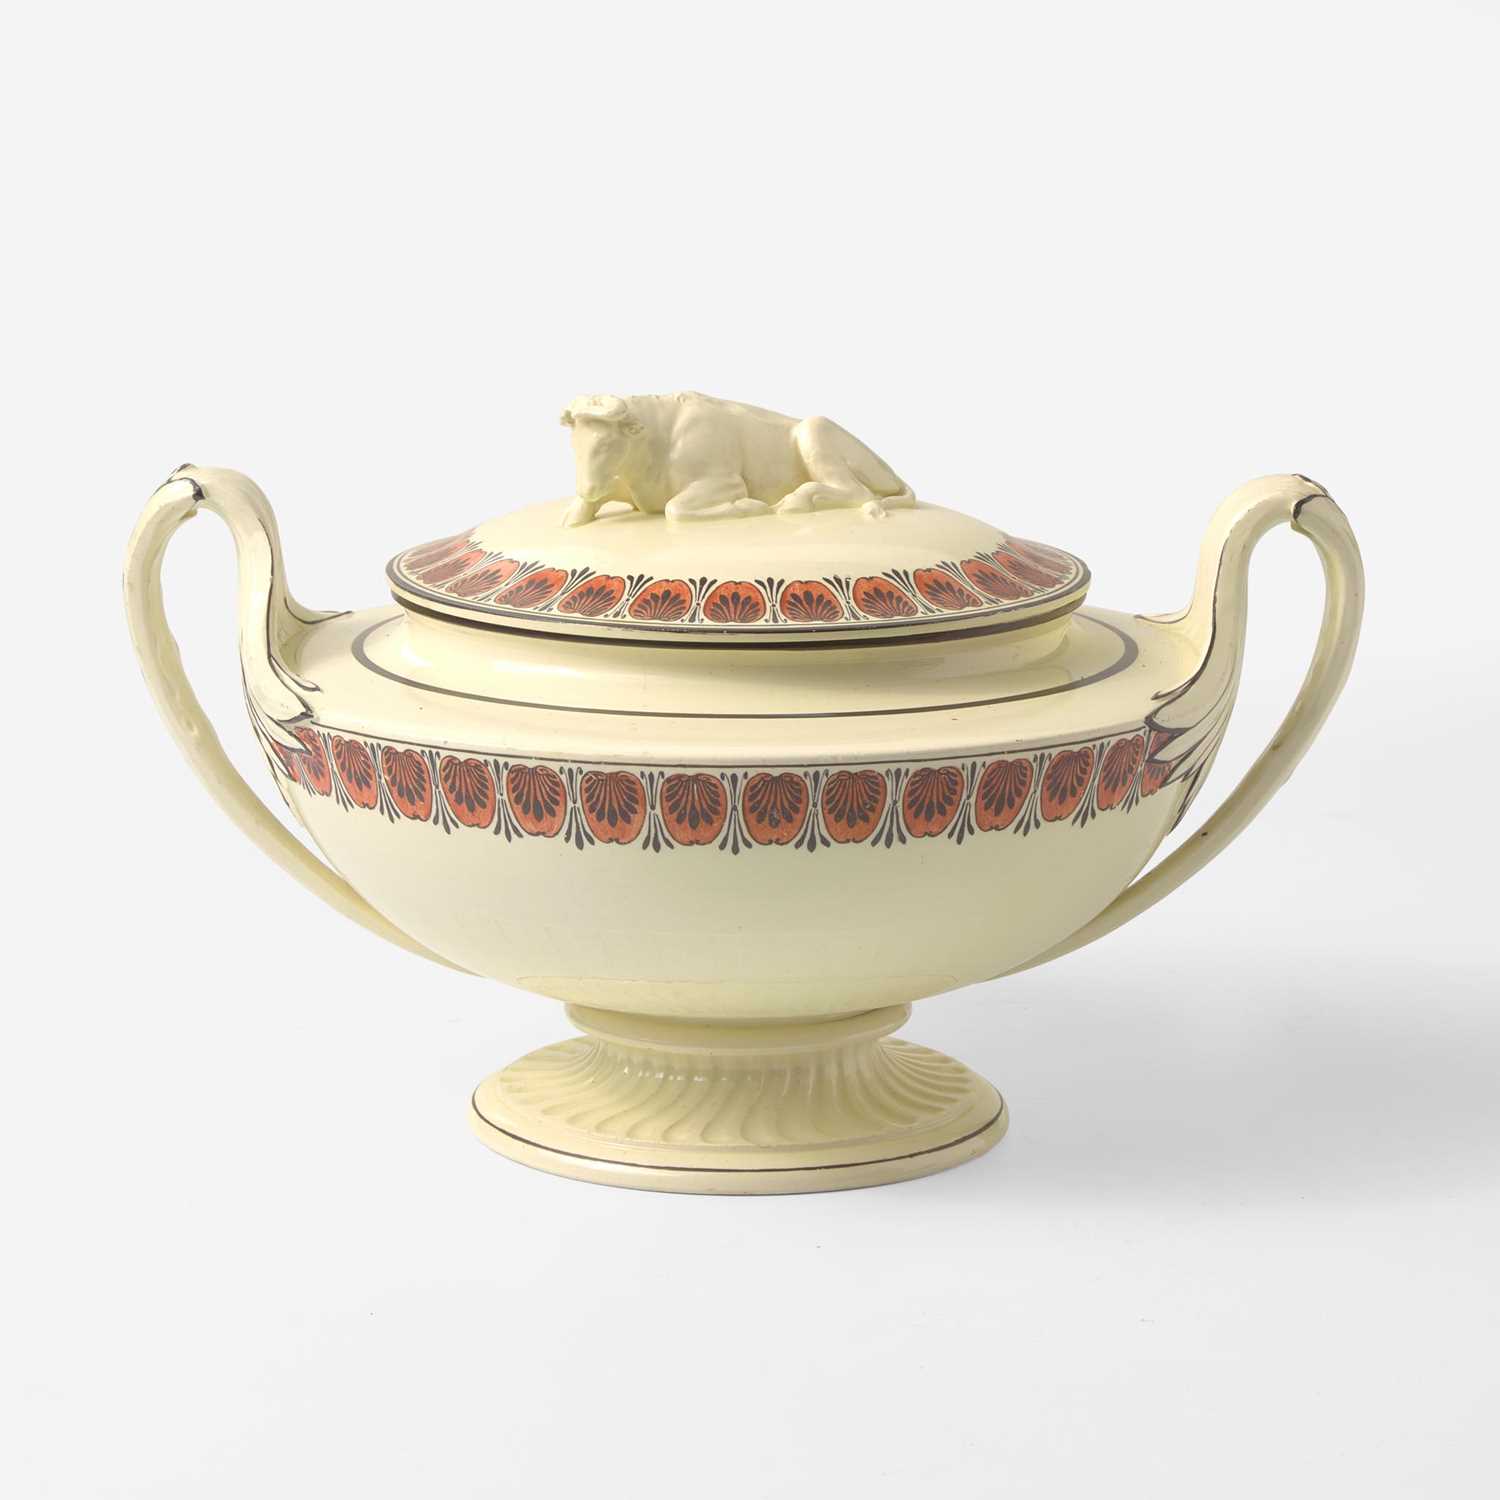 Lot 7 - A Wedgwood Queensware Tureen with Recumbent Bull Finial